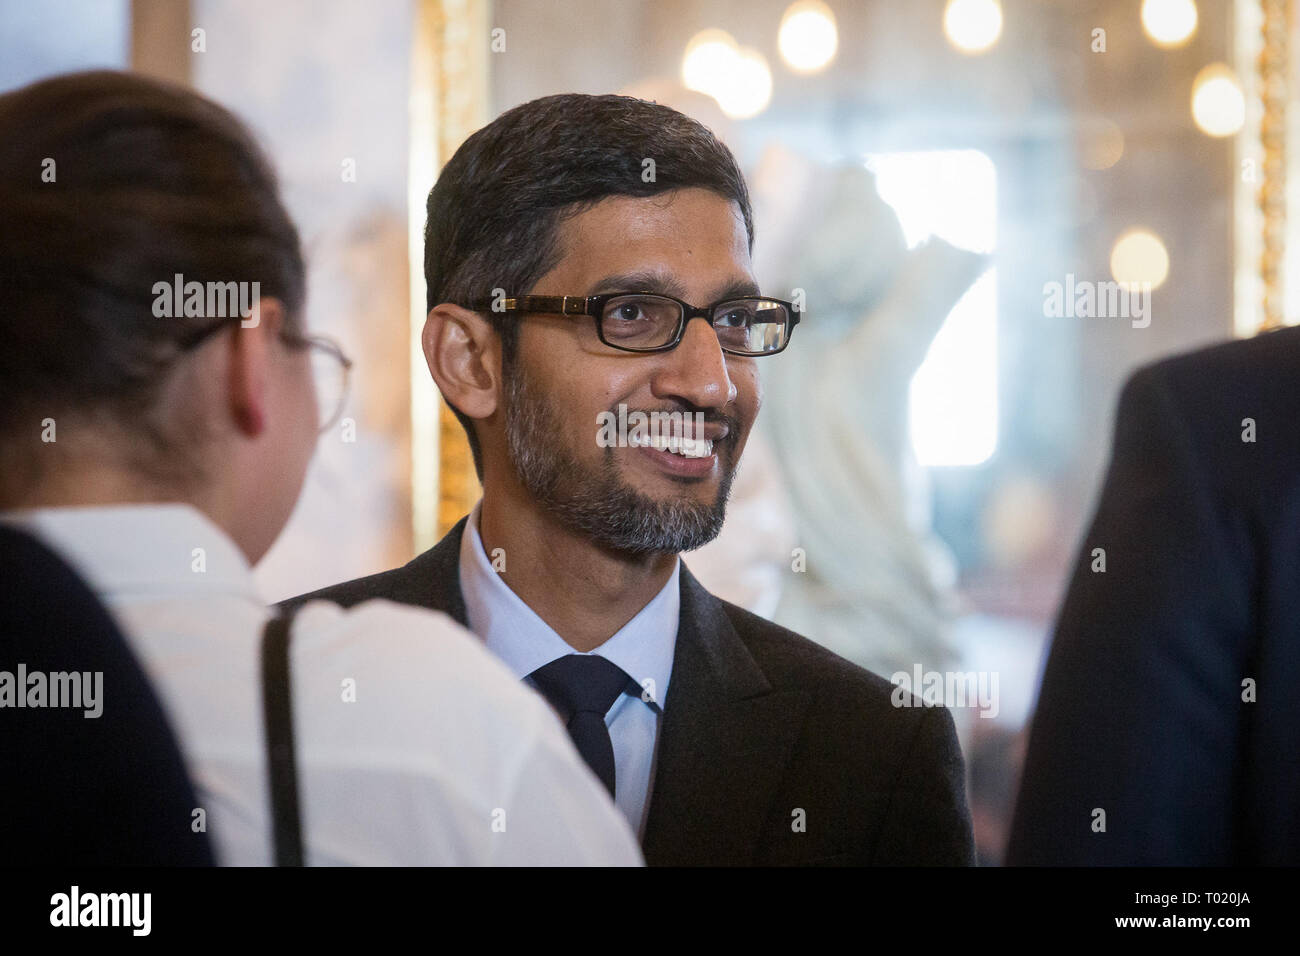 Google CEO Sundar Pichai during the 'Central and Eastern Europe Innovation Roundtable' at Lazienki Palace in Warsaw, Poland on 21 January 2019 Stock Photo